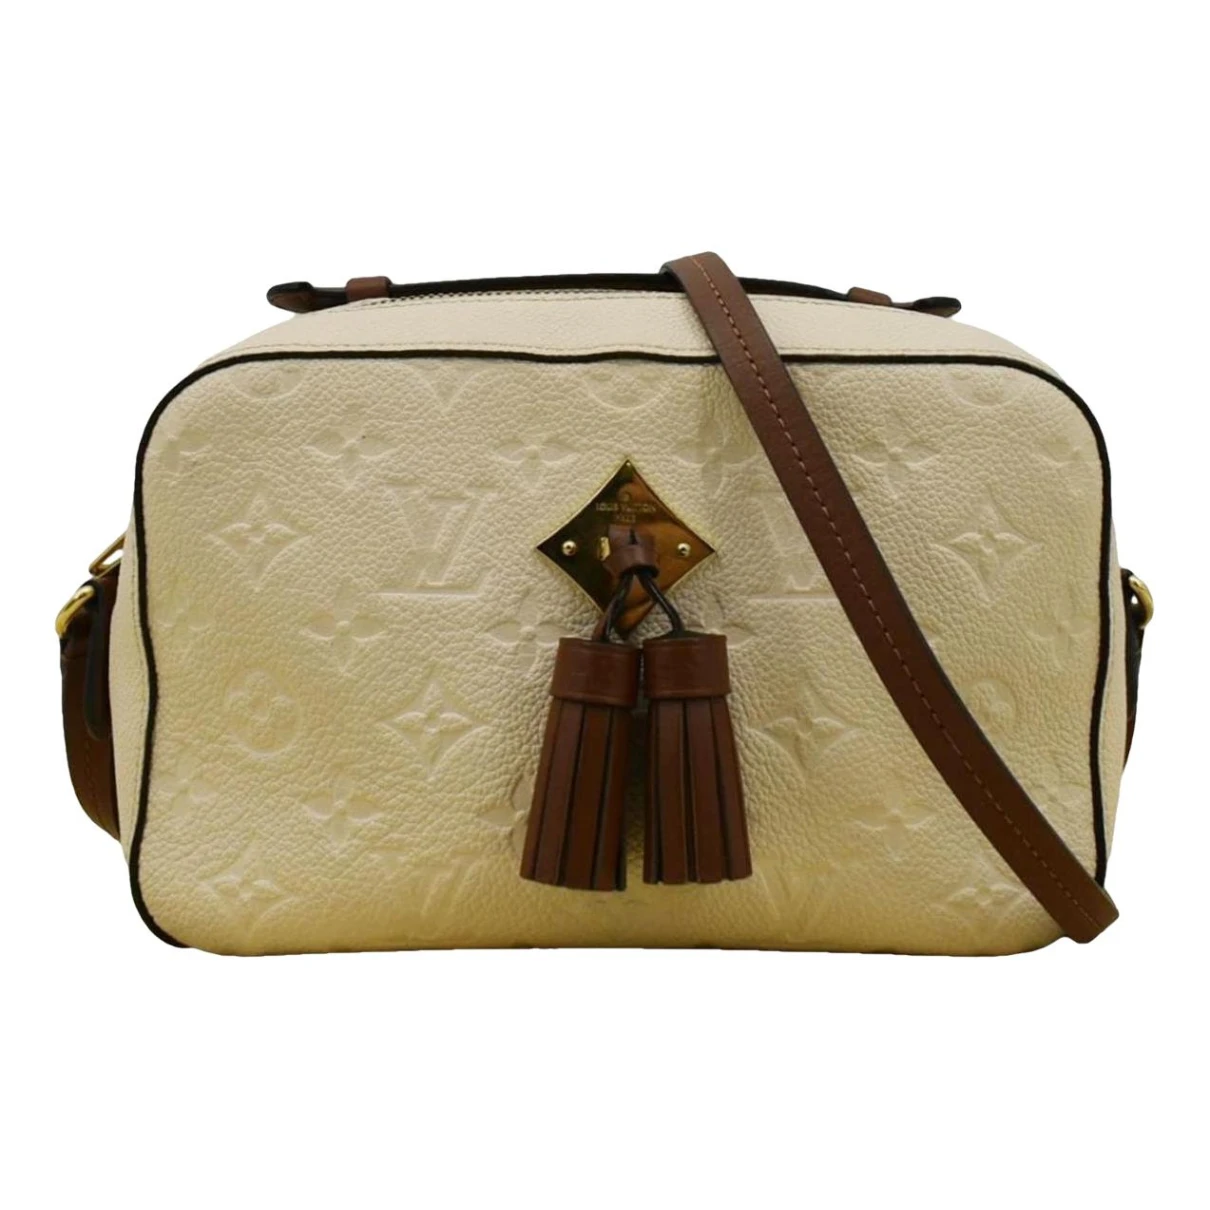 Pre-owned Louis Vuitton Leather Crossbody Bag In White